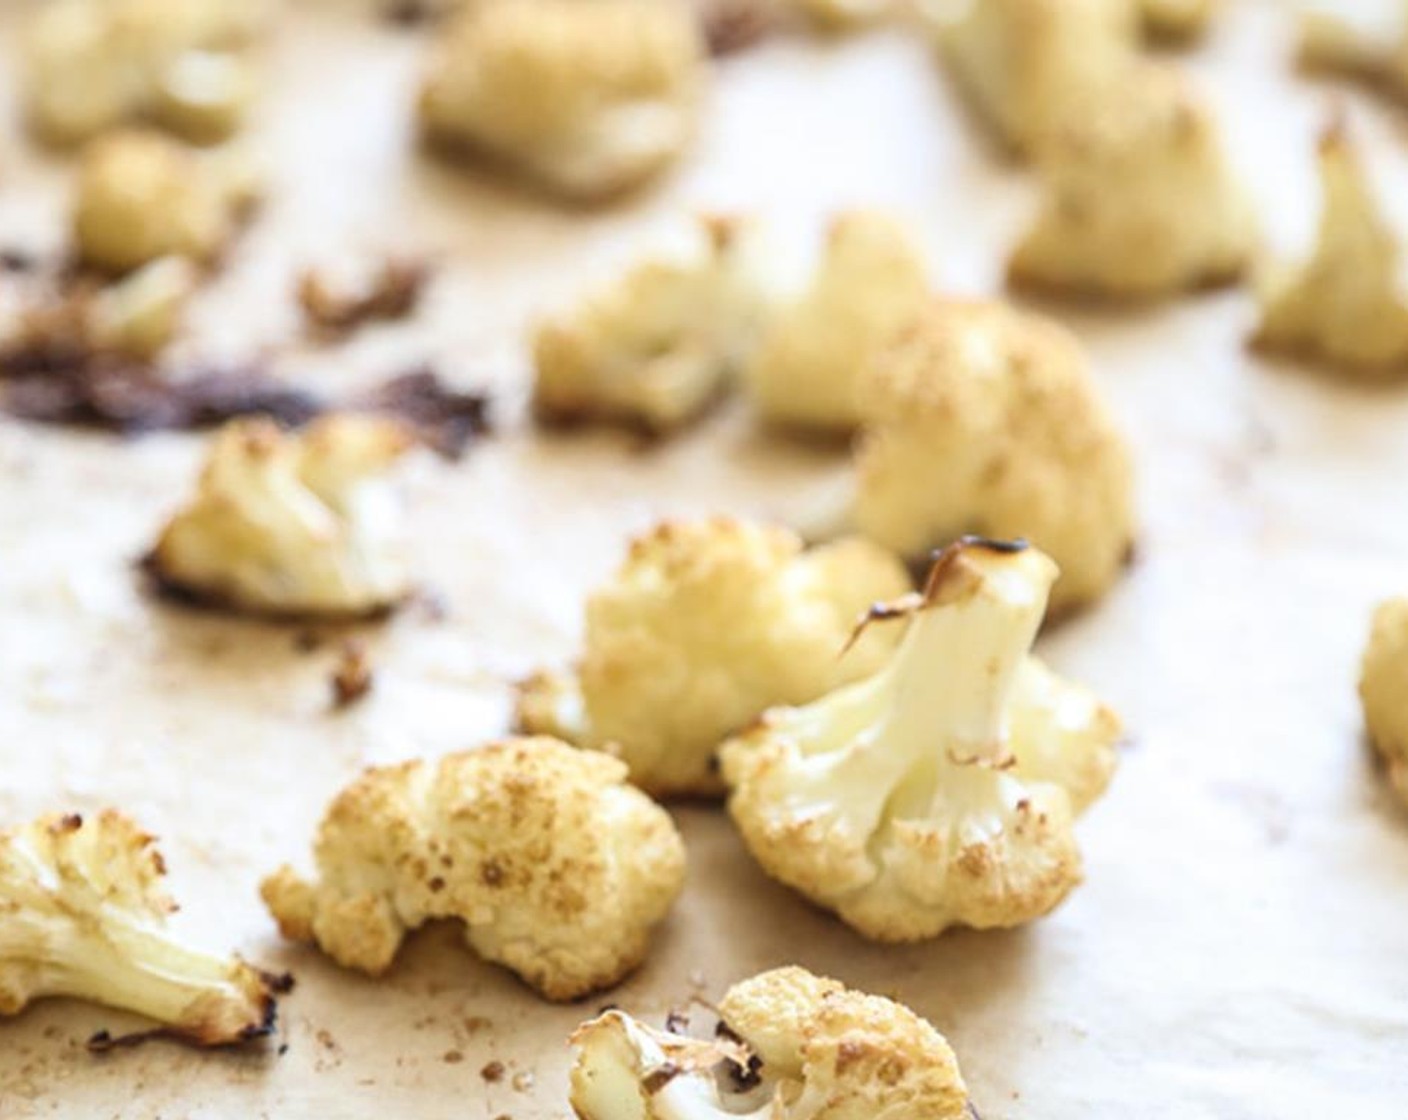 step 2 On a parchment-lined baking sheet, toss the Cauliflower (1) with Extra-Virgin Olive Oil (1 Tbsp), Ground Cumin (1/2 tsp), and Sea Salt (1/2 tsp).